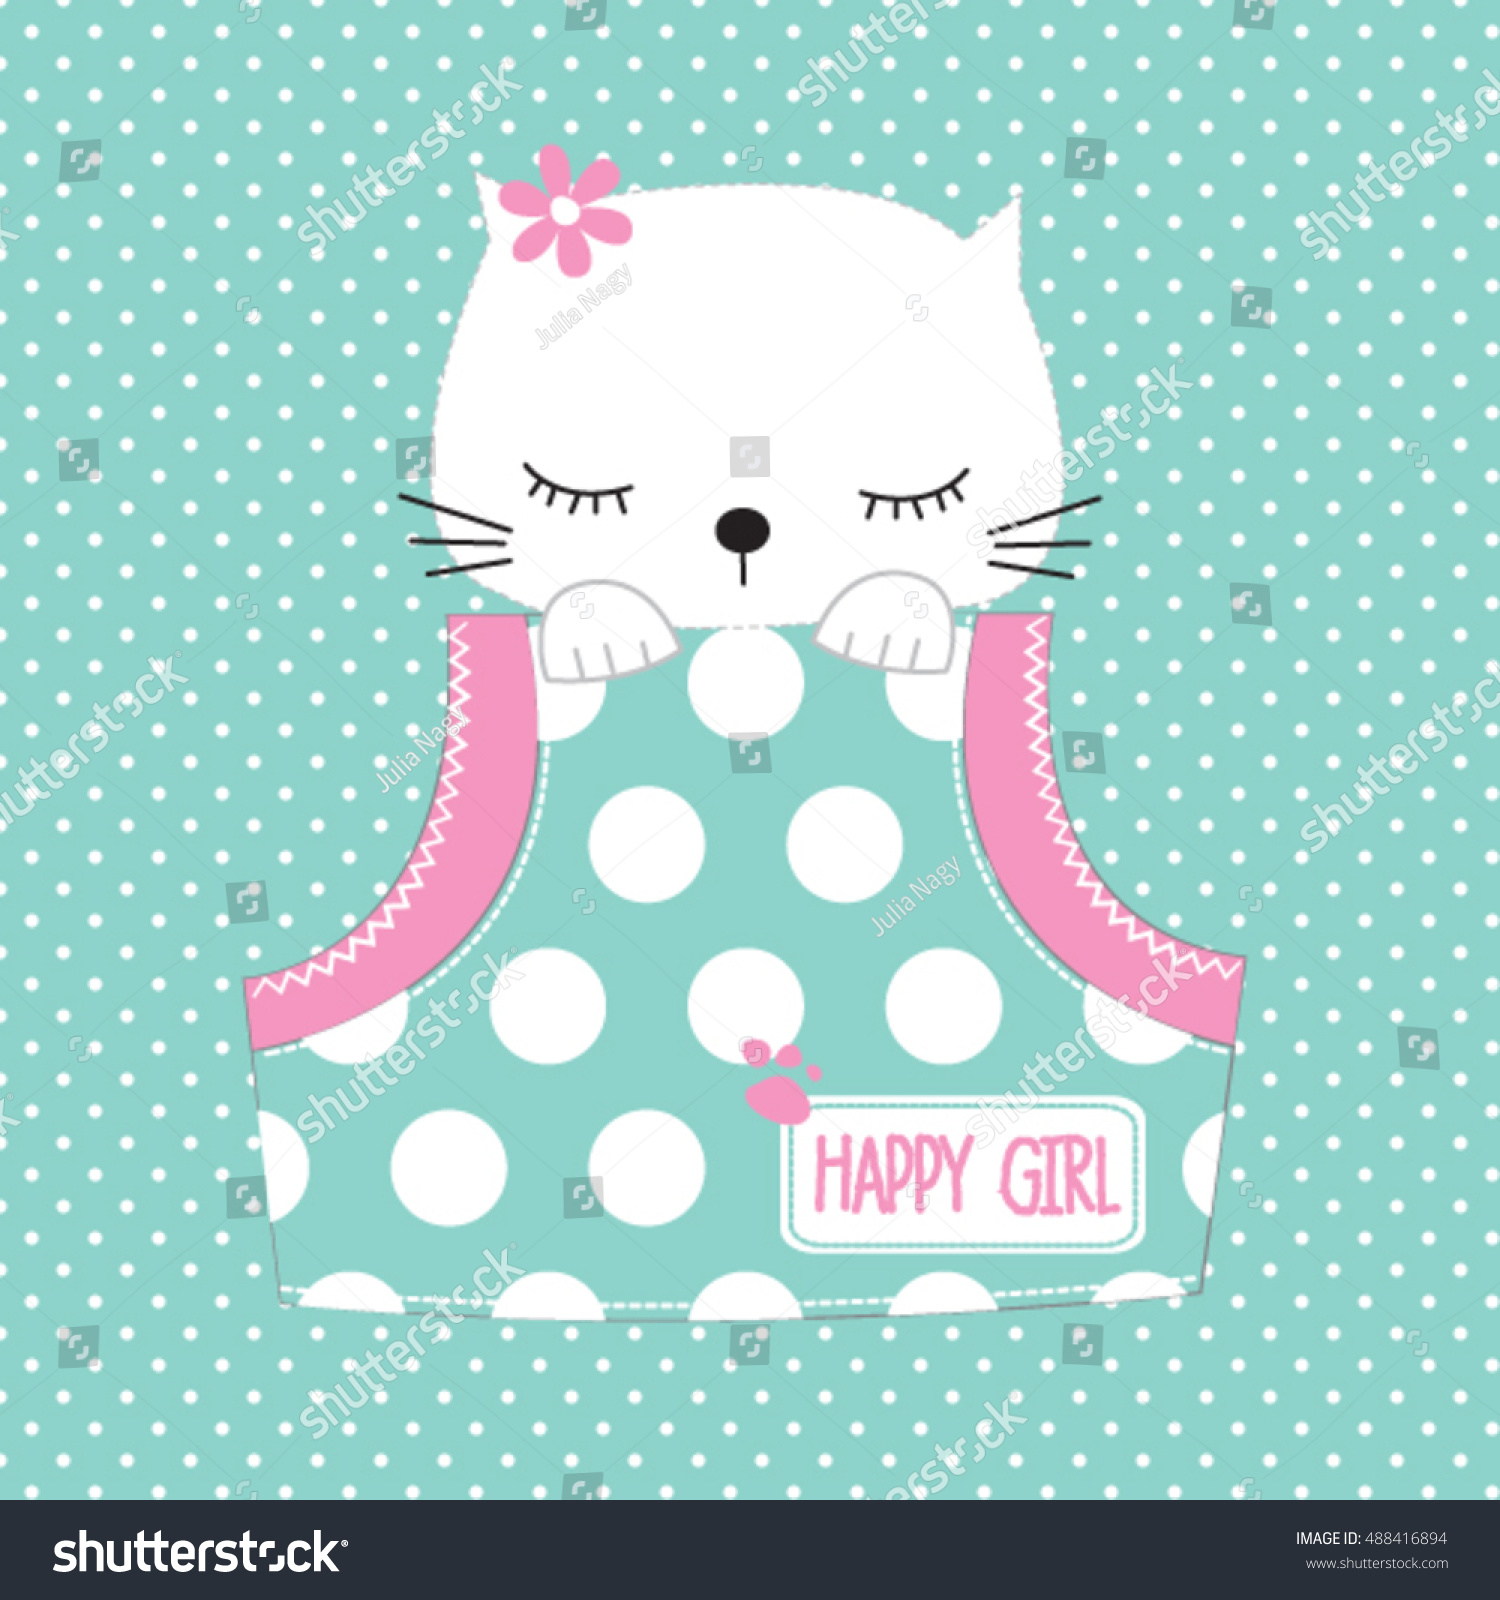 SVG of cute cat in the pocket on polka dots background, T-shirt graphics for girls vector illustration svg